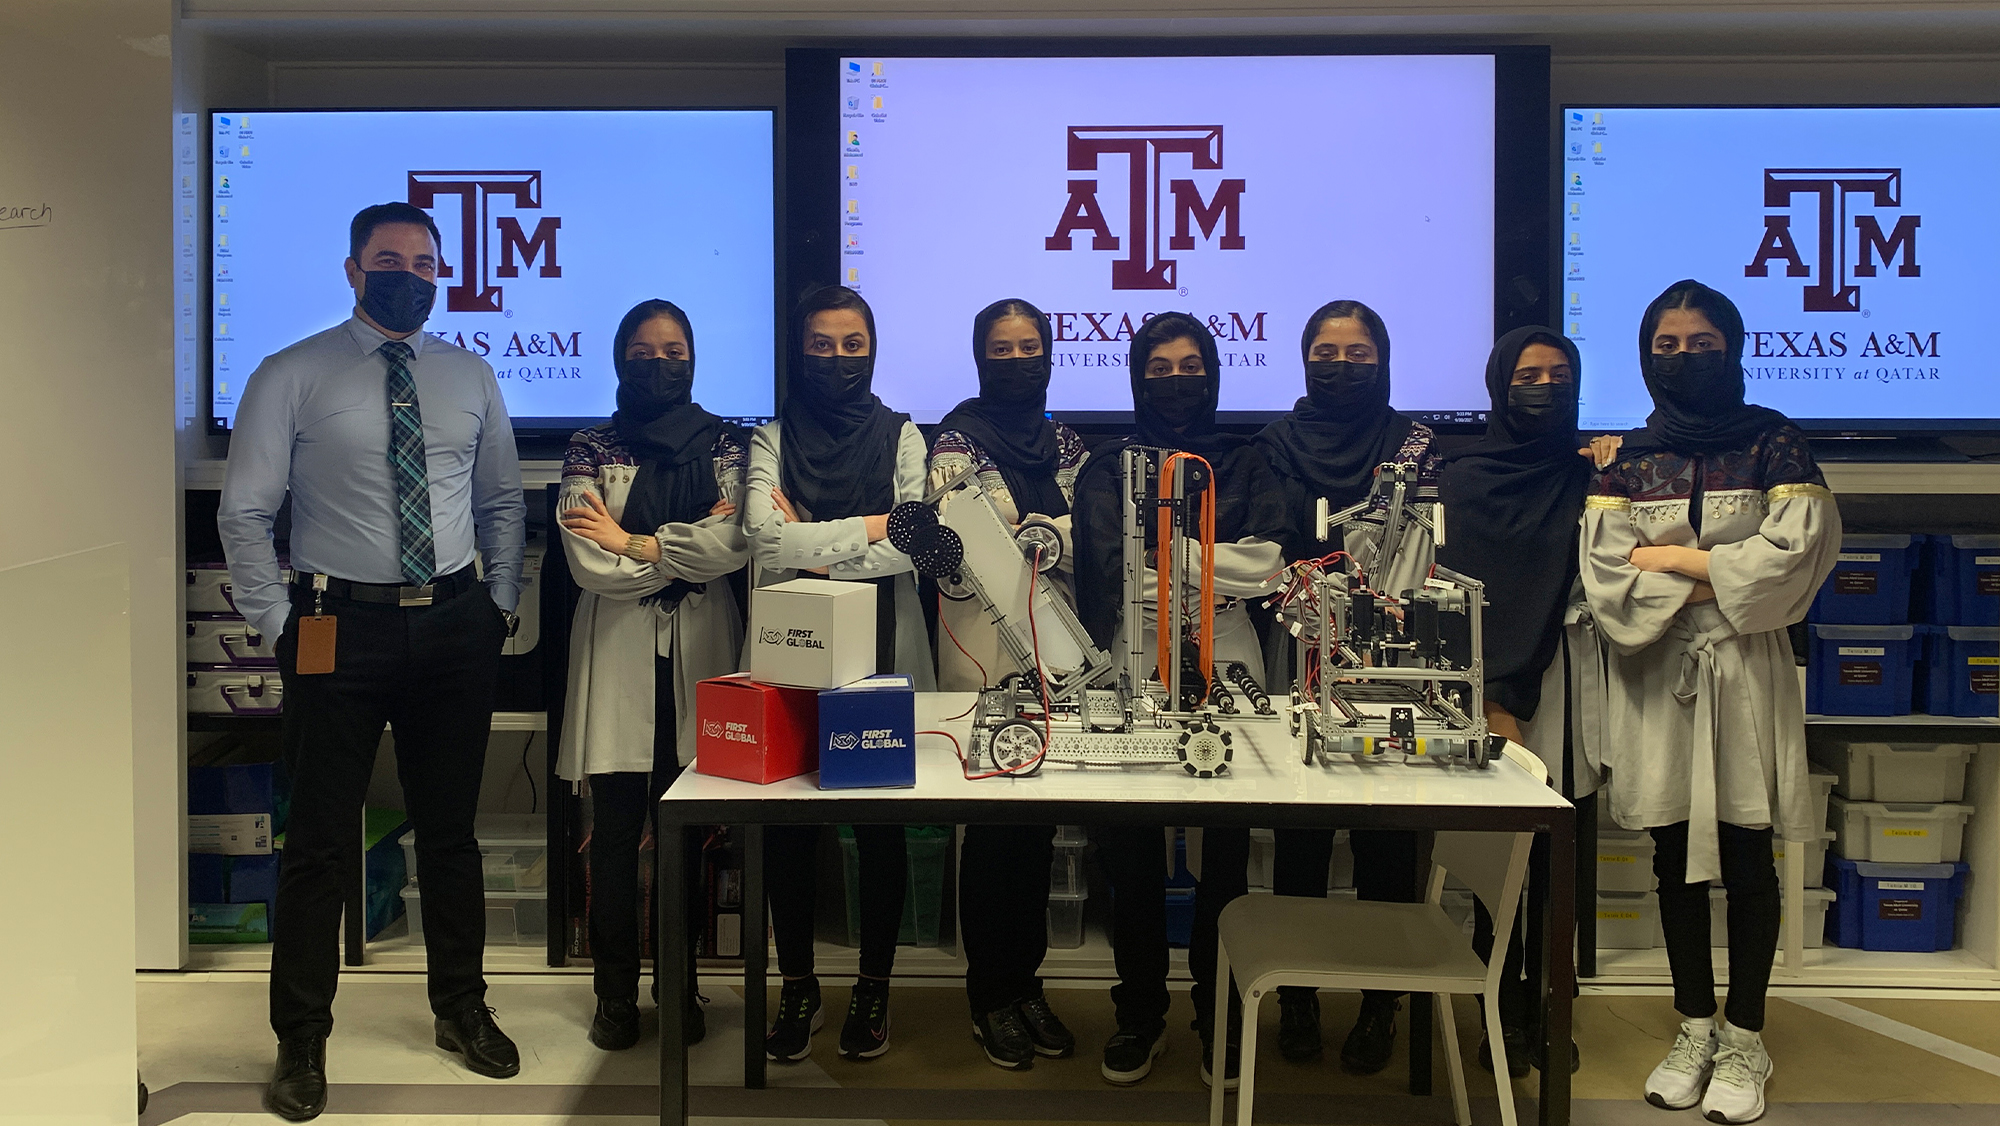 In the foreground, robots sit atop a table. Behind the table, Dr. Mohamed Gharib stands with the Afghan Dreamer team. In the background the Texas A&amp;M University at Qatar logo is displayed on three television monitors.